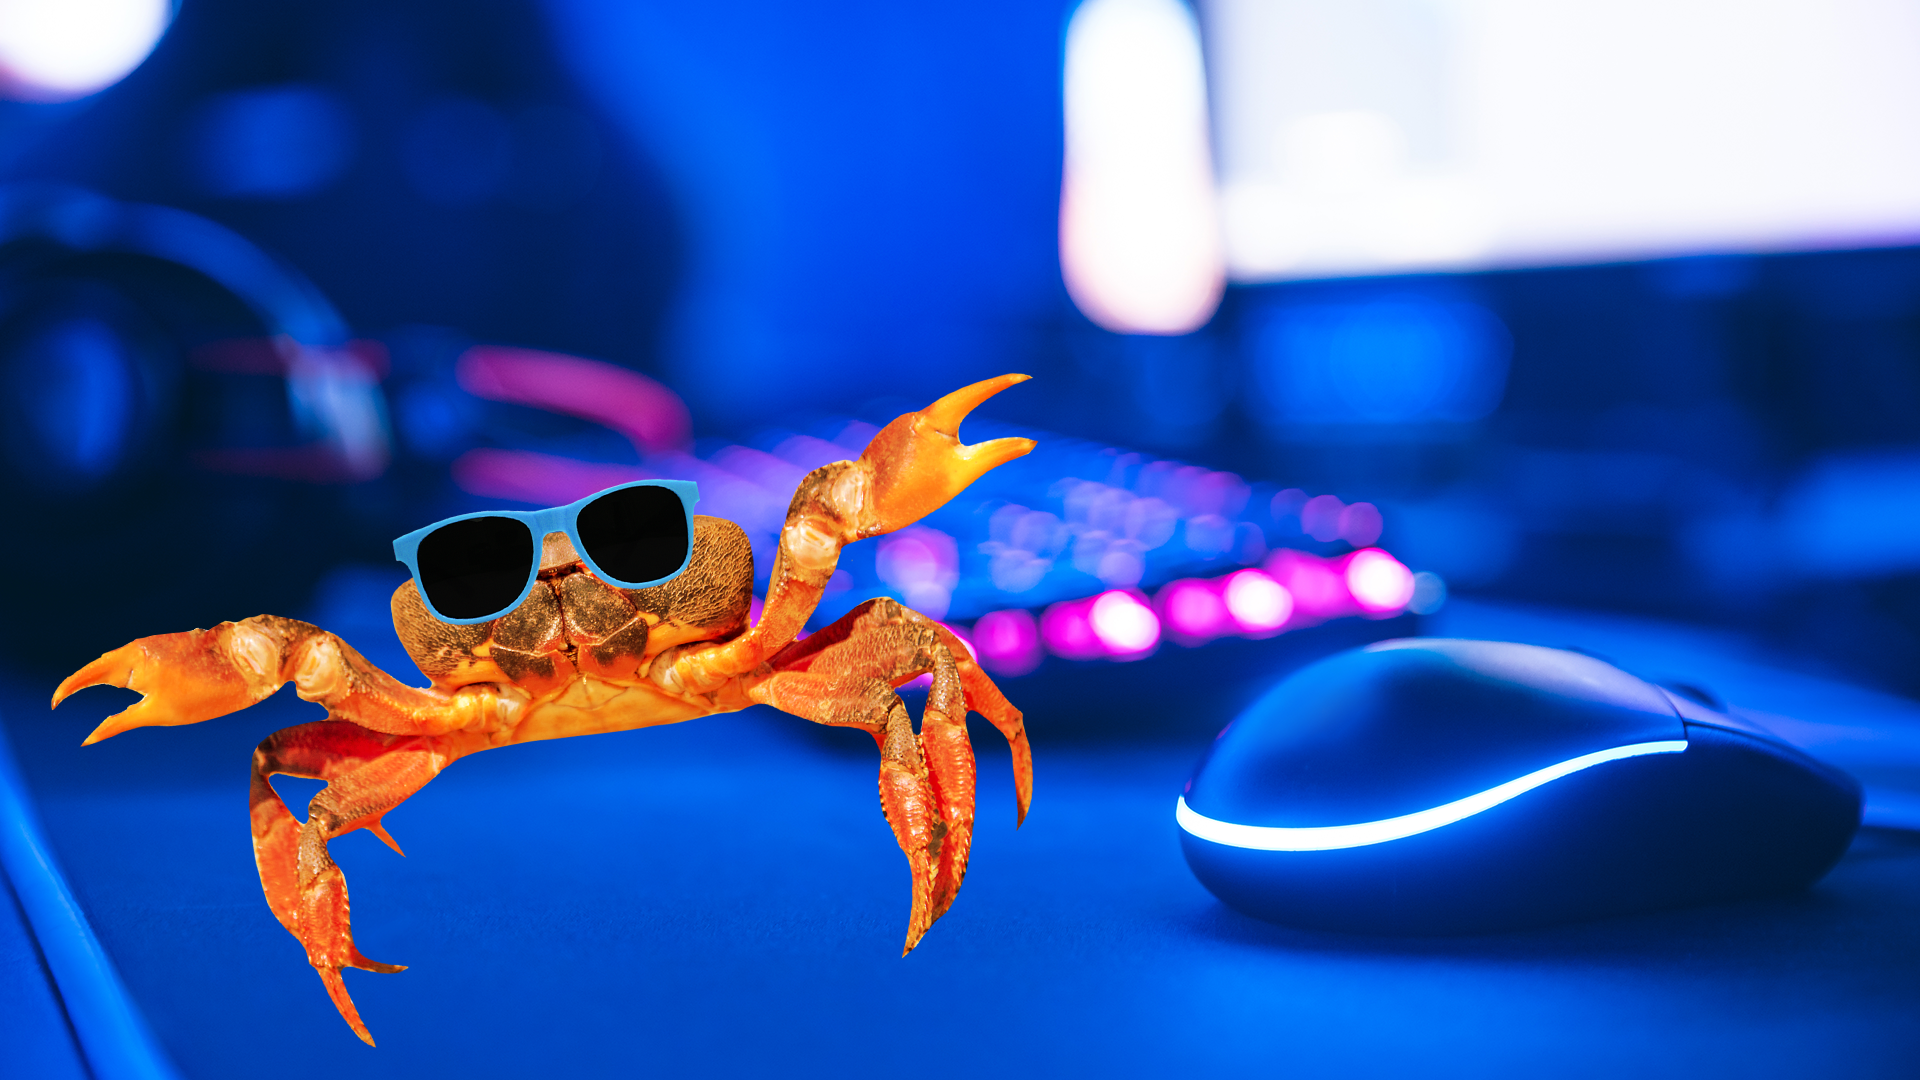 A crab and a computer mouse